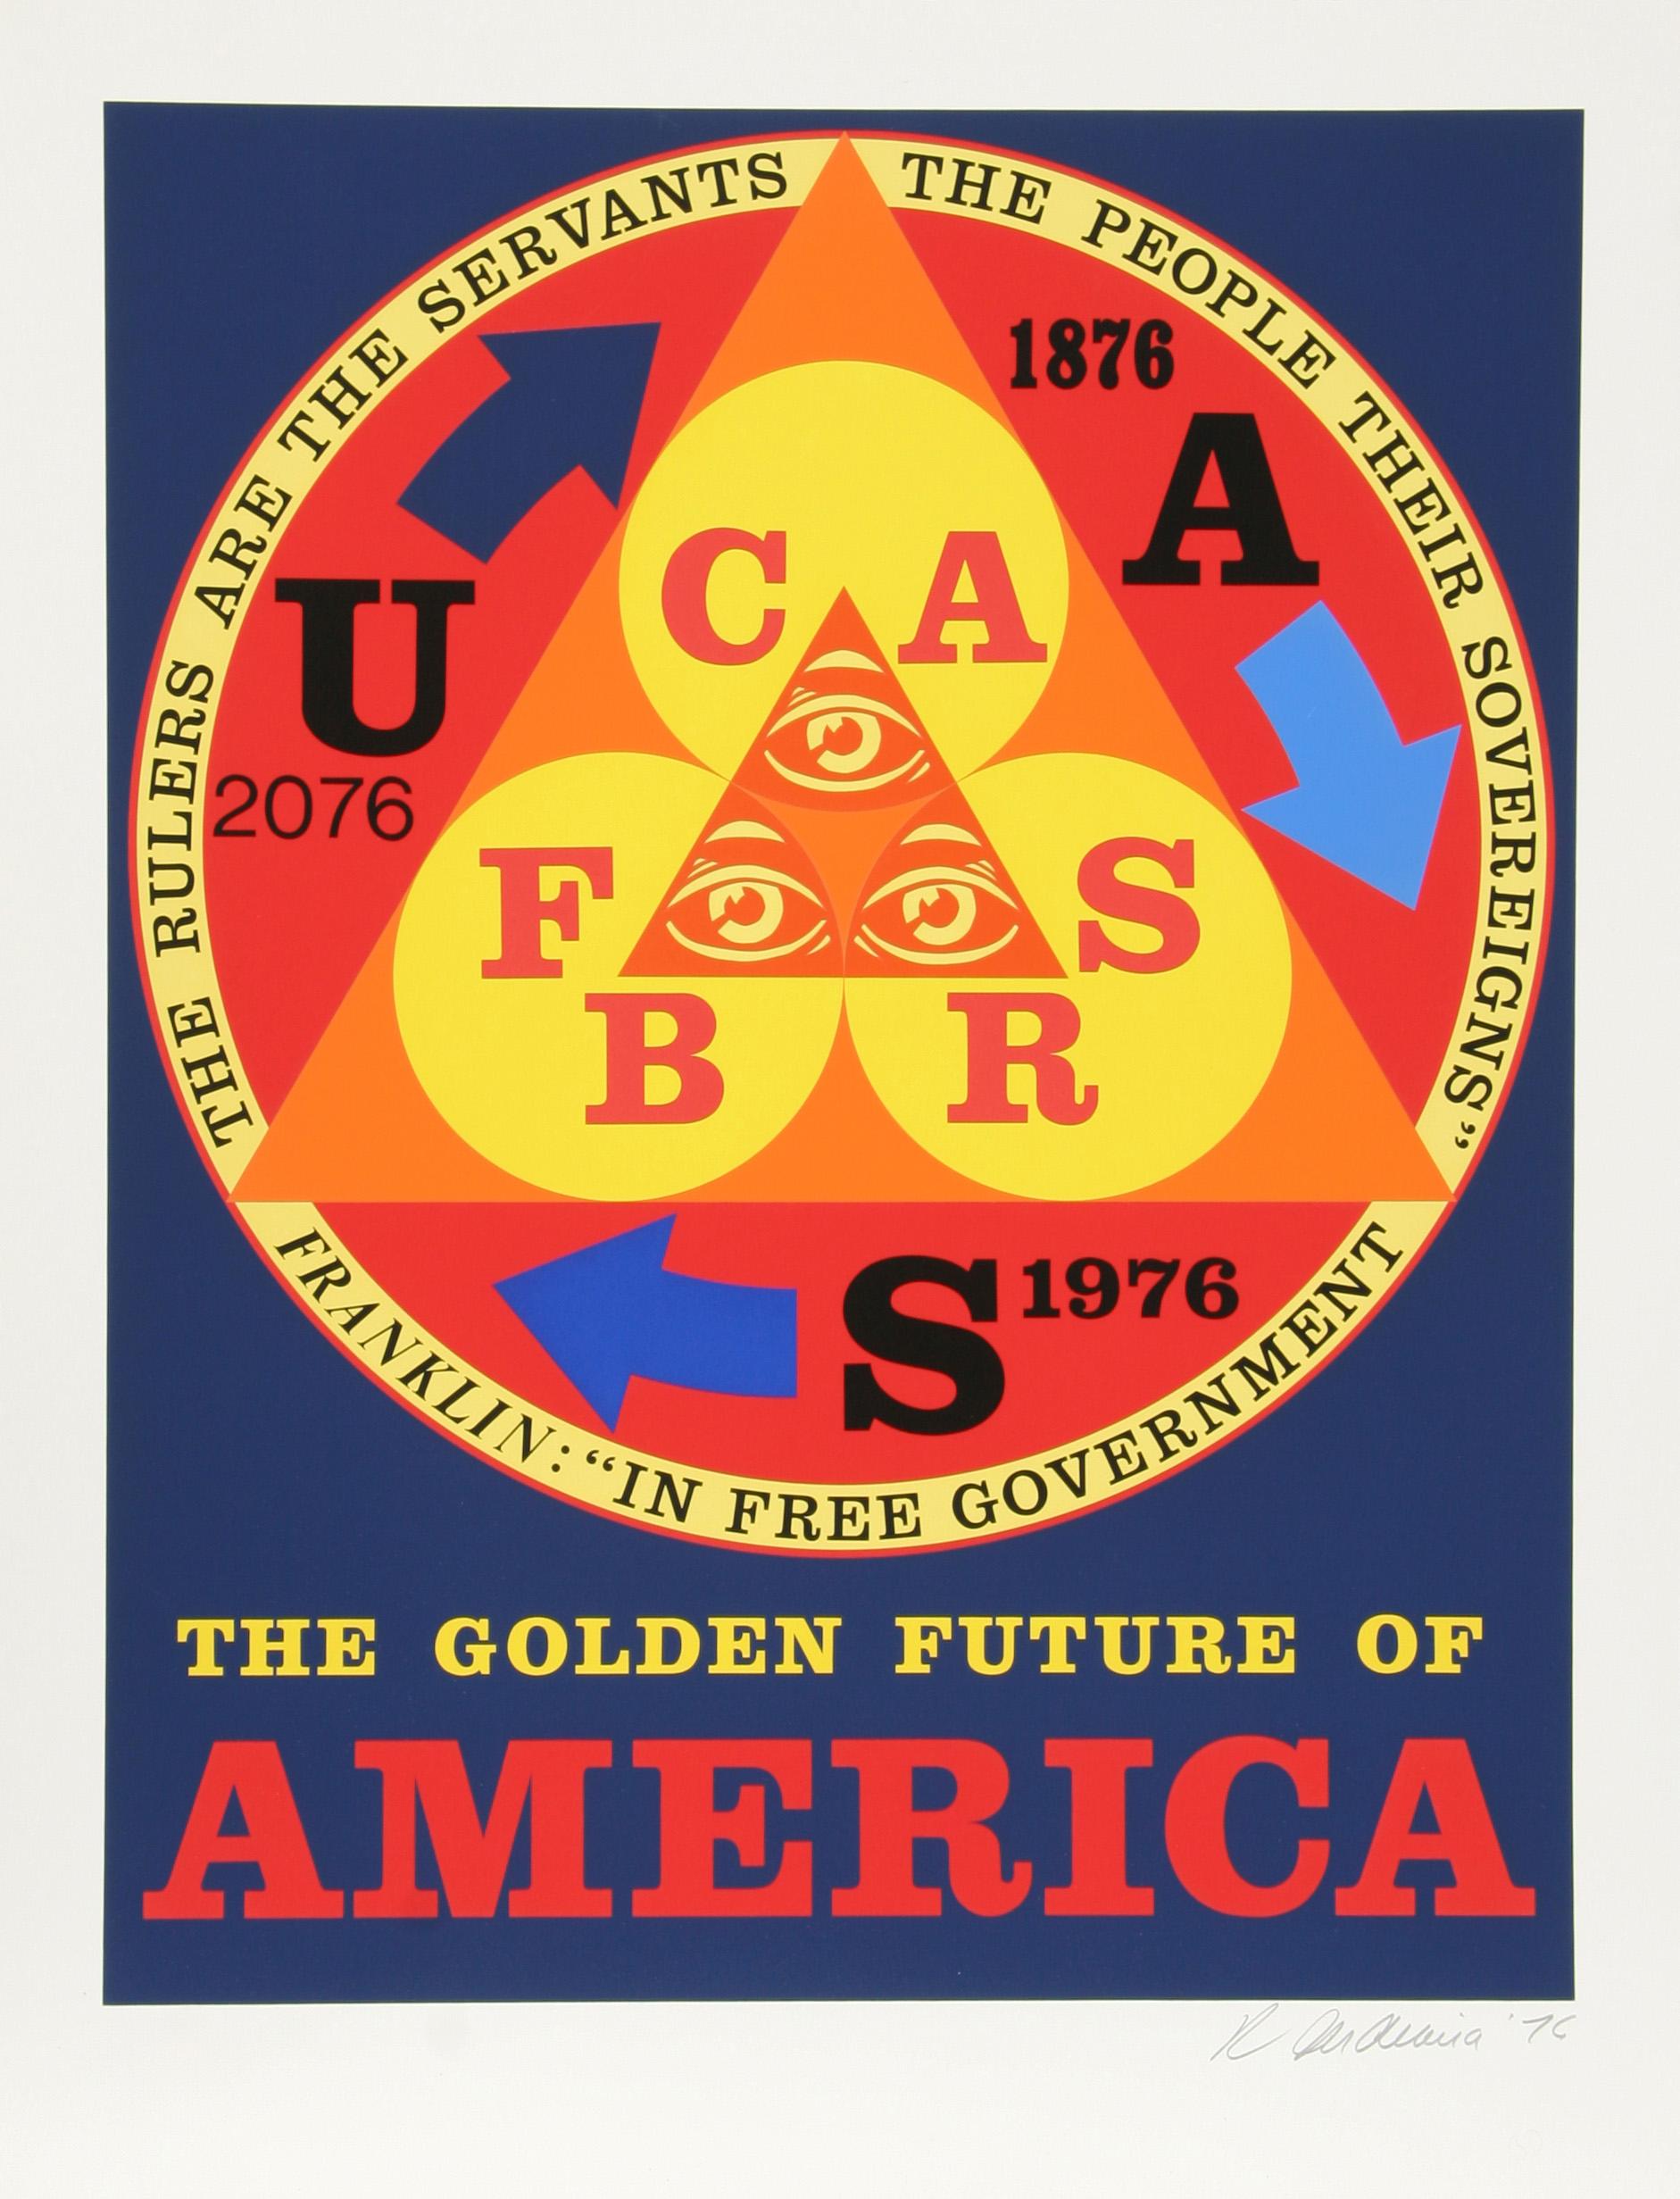 Artist: Robert Indiana
Title: Golden Future of America
Year: 1976
Medium: Serigraph on Arches, signed and numbered in pencil 
Edition: 175
Paper Size: 26.25 x 20 inches 

Printer and Blind Stamp: Simca Print Artists, Inc. New York
Publisher: